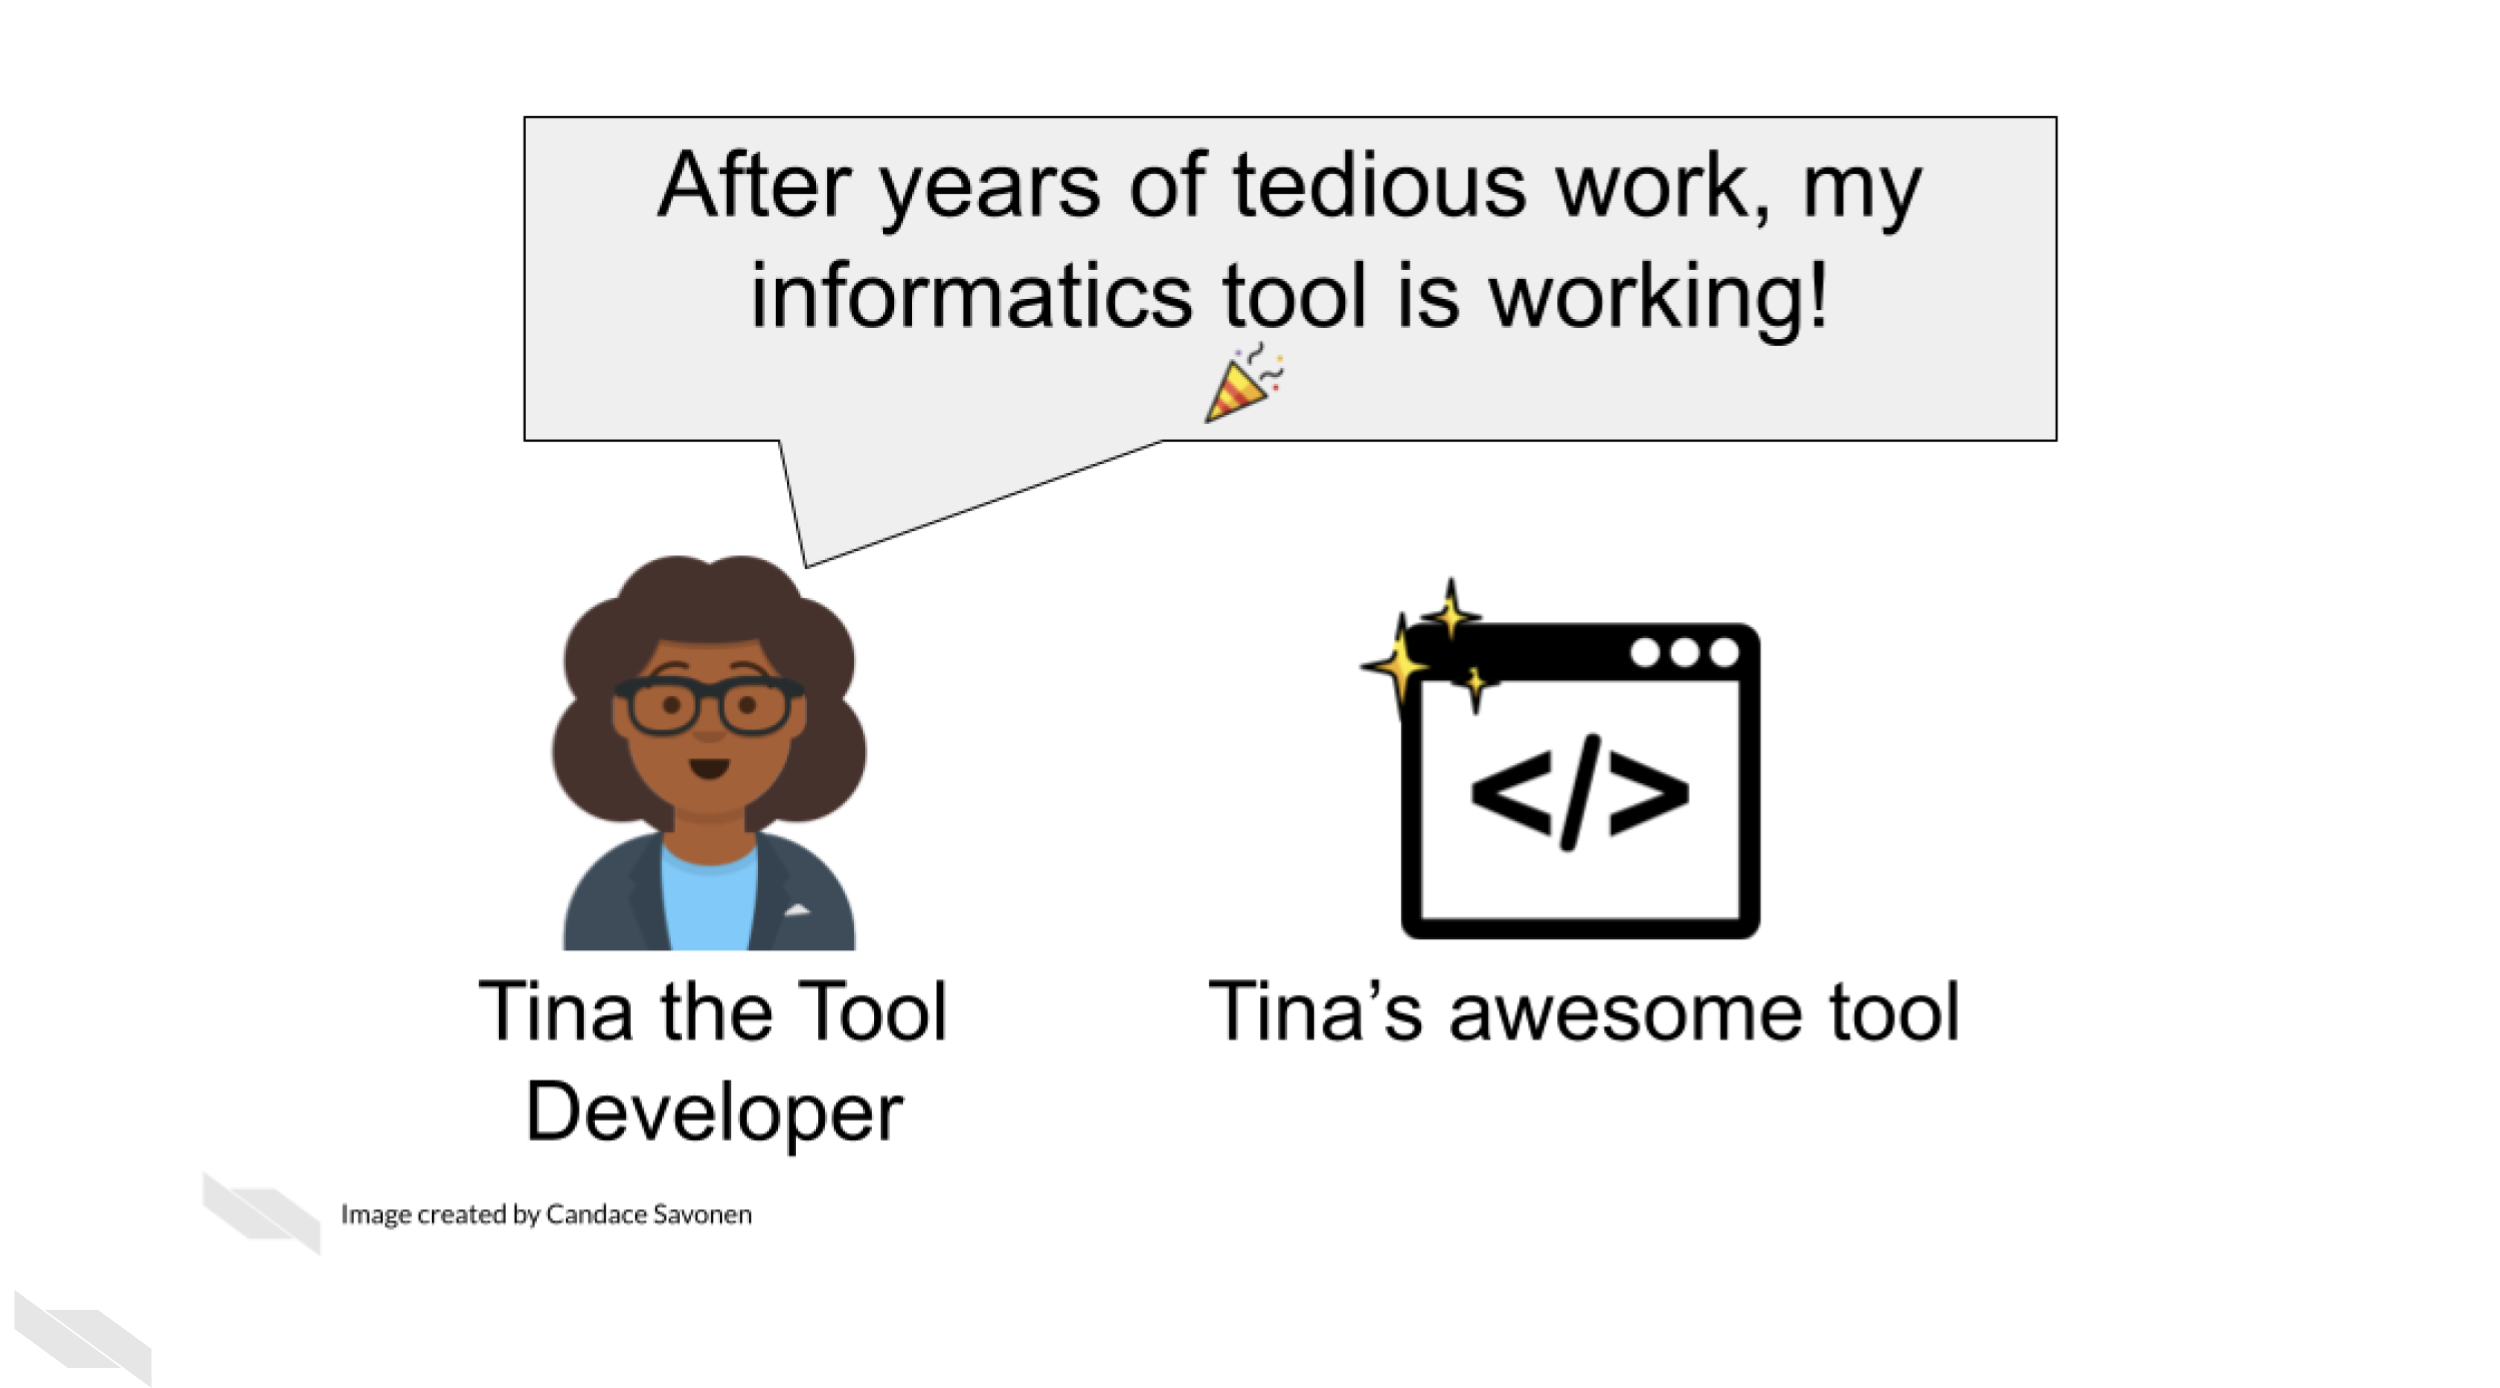 Tina the Tool Developer says, After years of tedious work my informatics tool is working!. Tina’s awesome tool is a sparkling brand new.